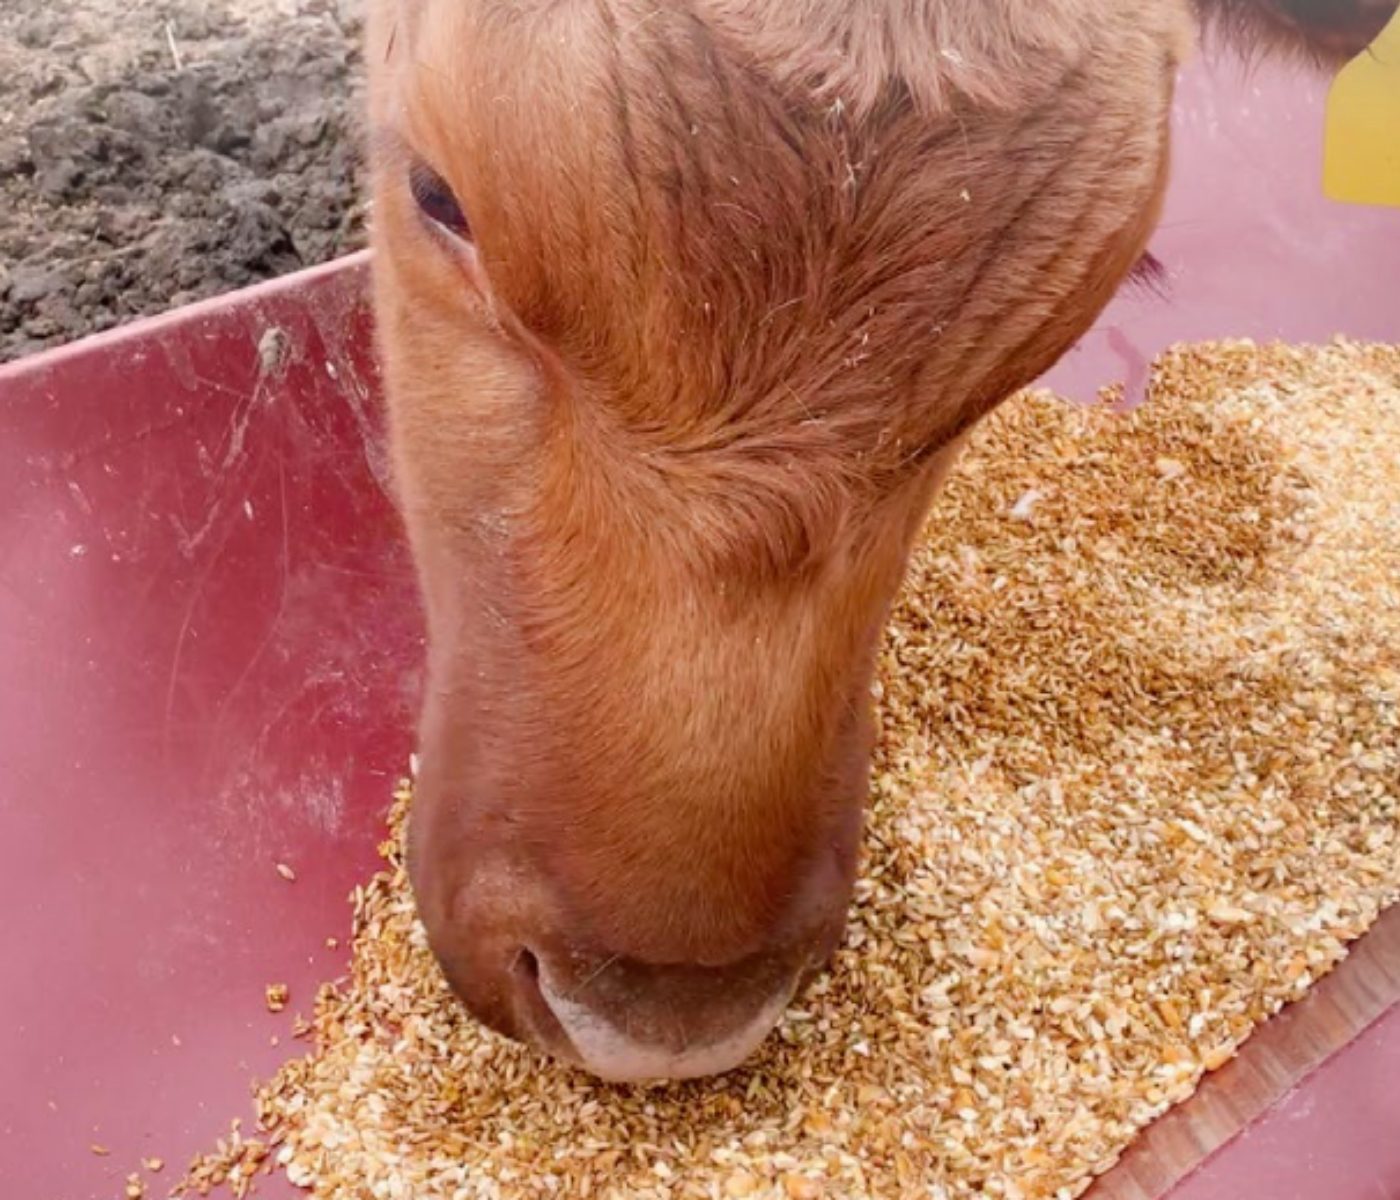 Calf nutrition: weaning practices (Part II)